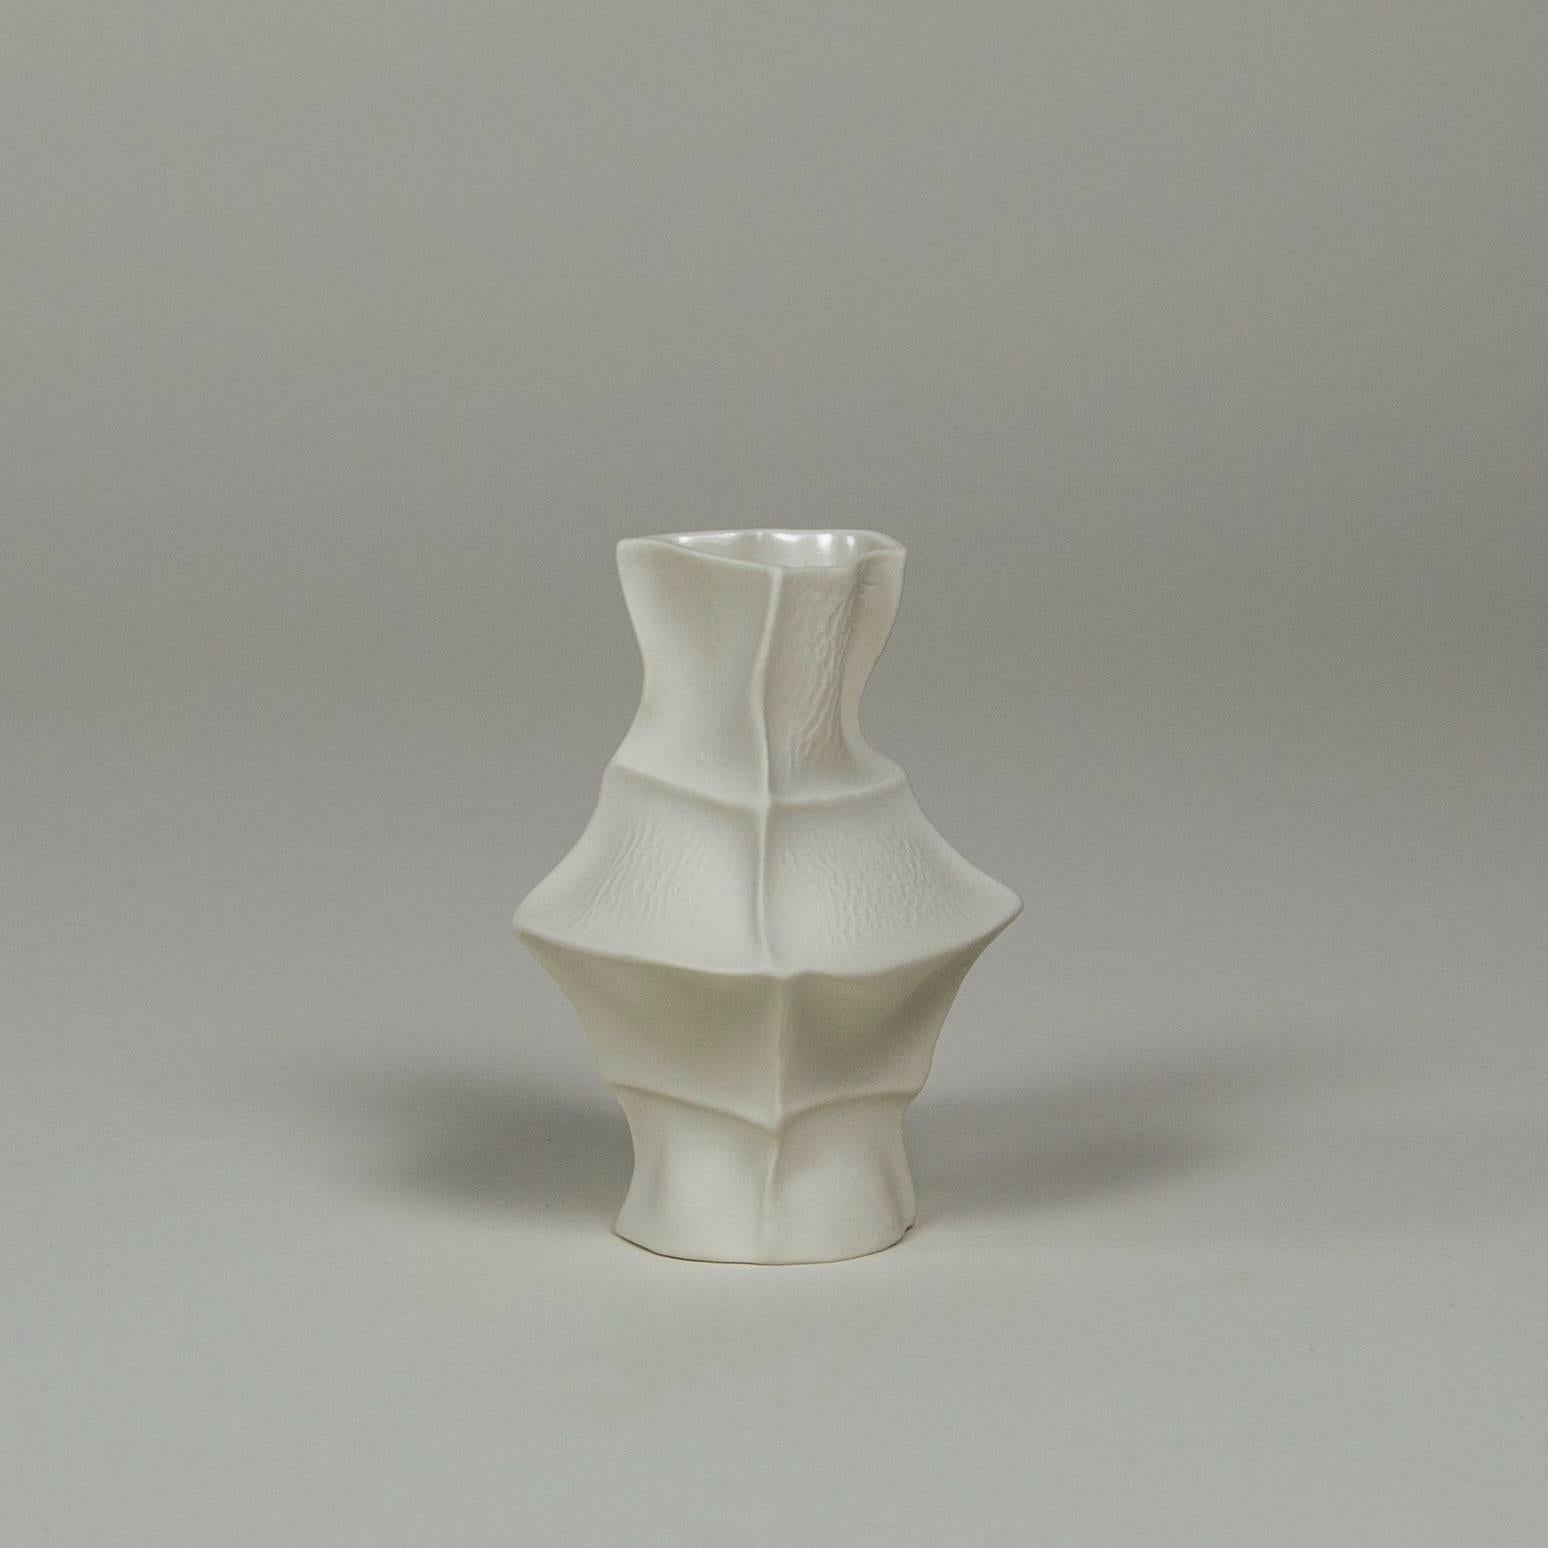 Contemporary Set of Five Kawa Vases by Luft Tanaka, Made to Order